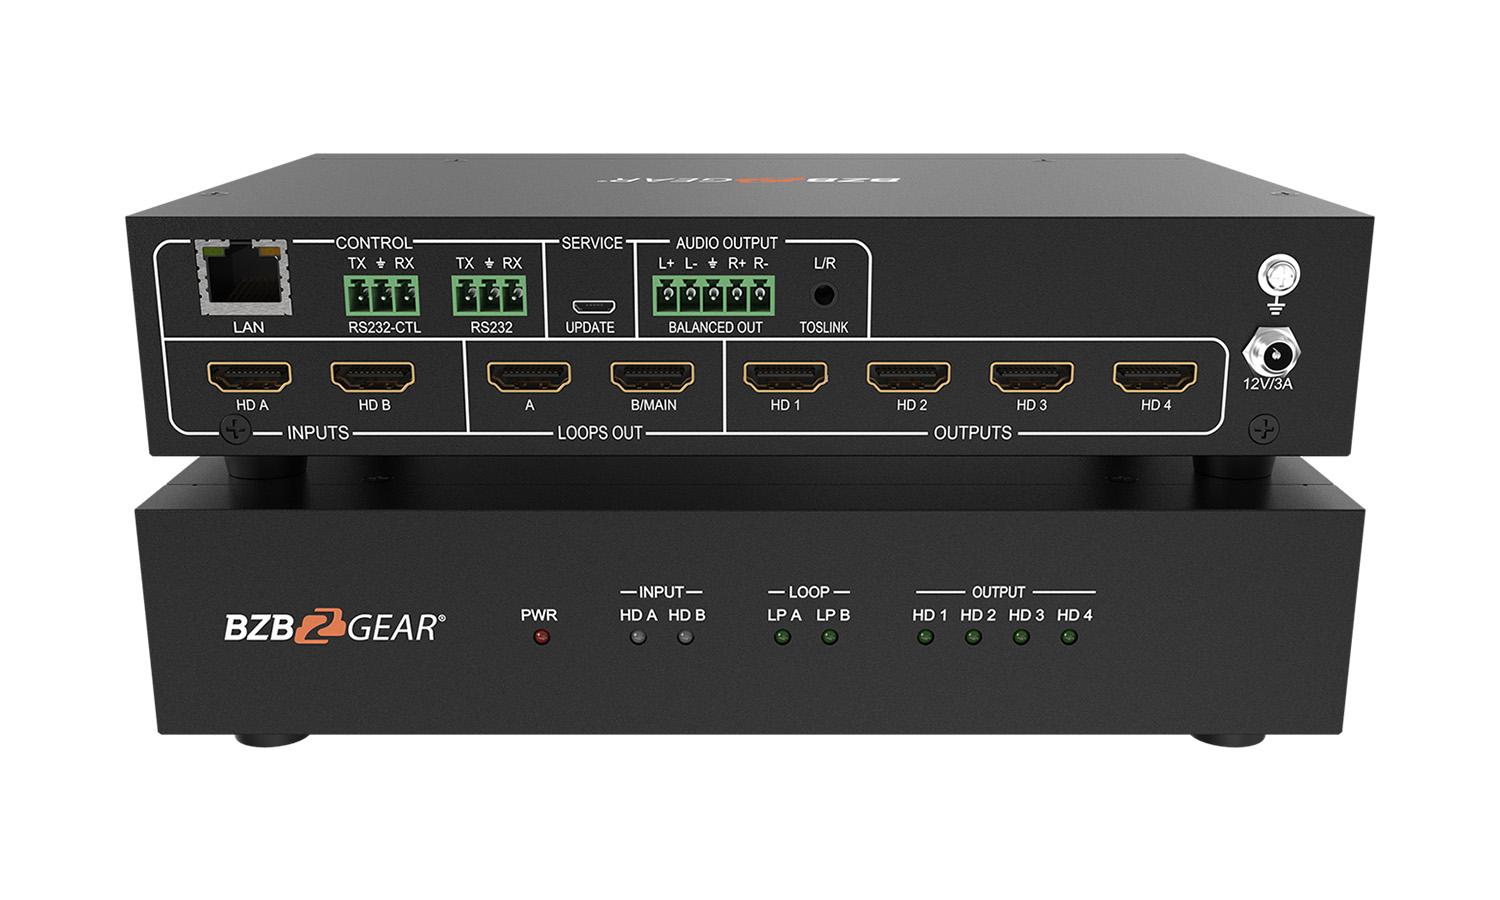 BG-UHD-VW24 2X2 4K 18Gbps UHD HDMI 2.0 Video Wall Processor/Controller with Audio and IP/RS232 Control by BZBGEAR